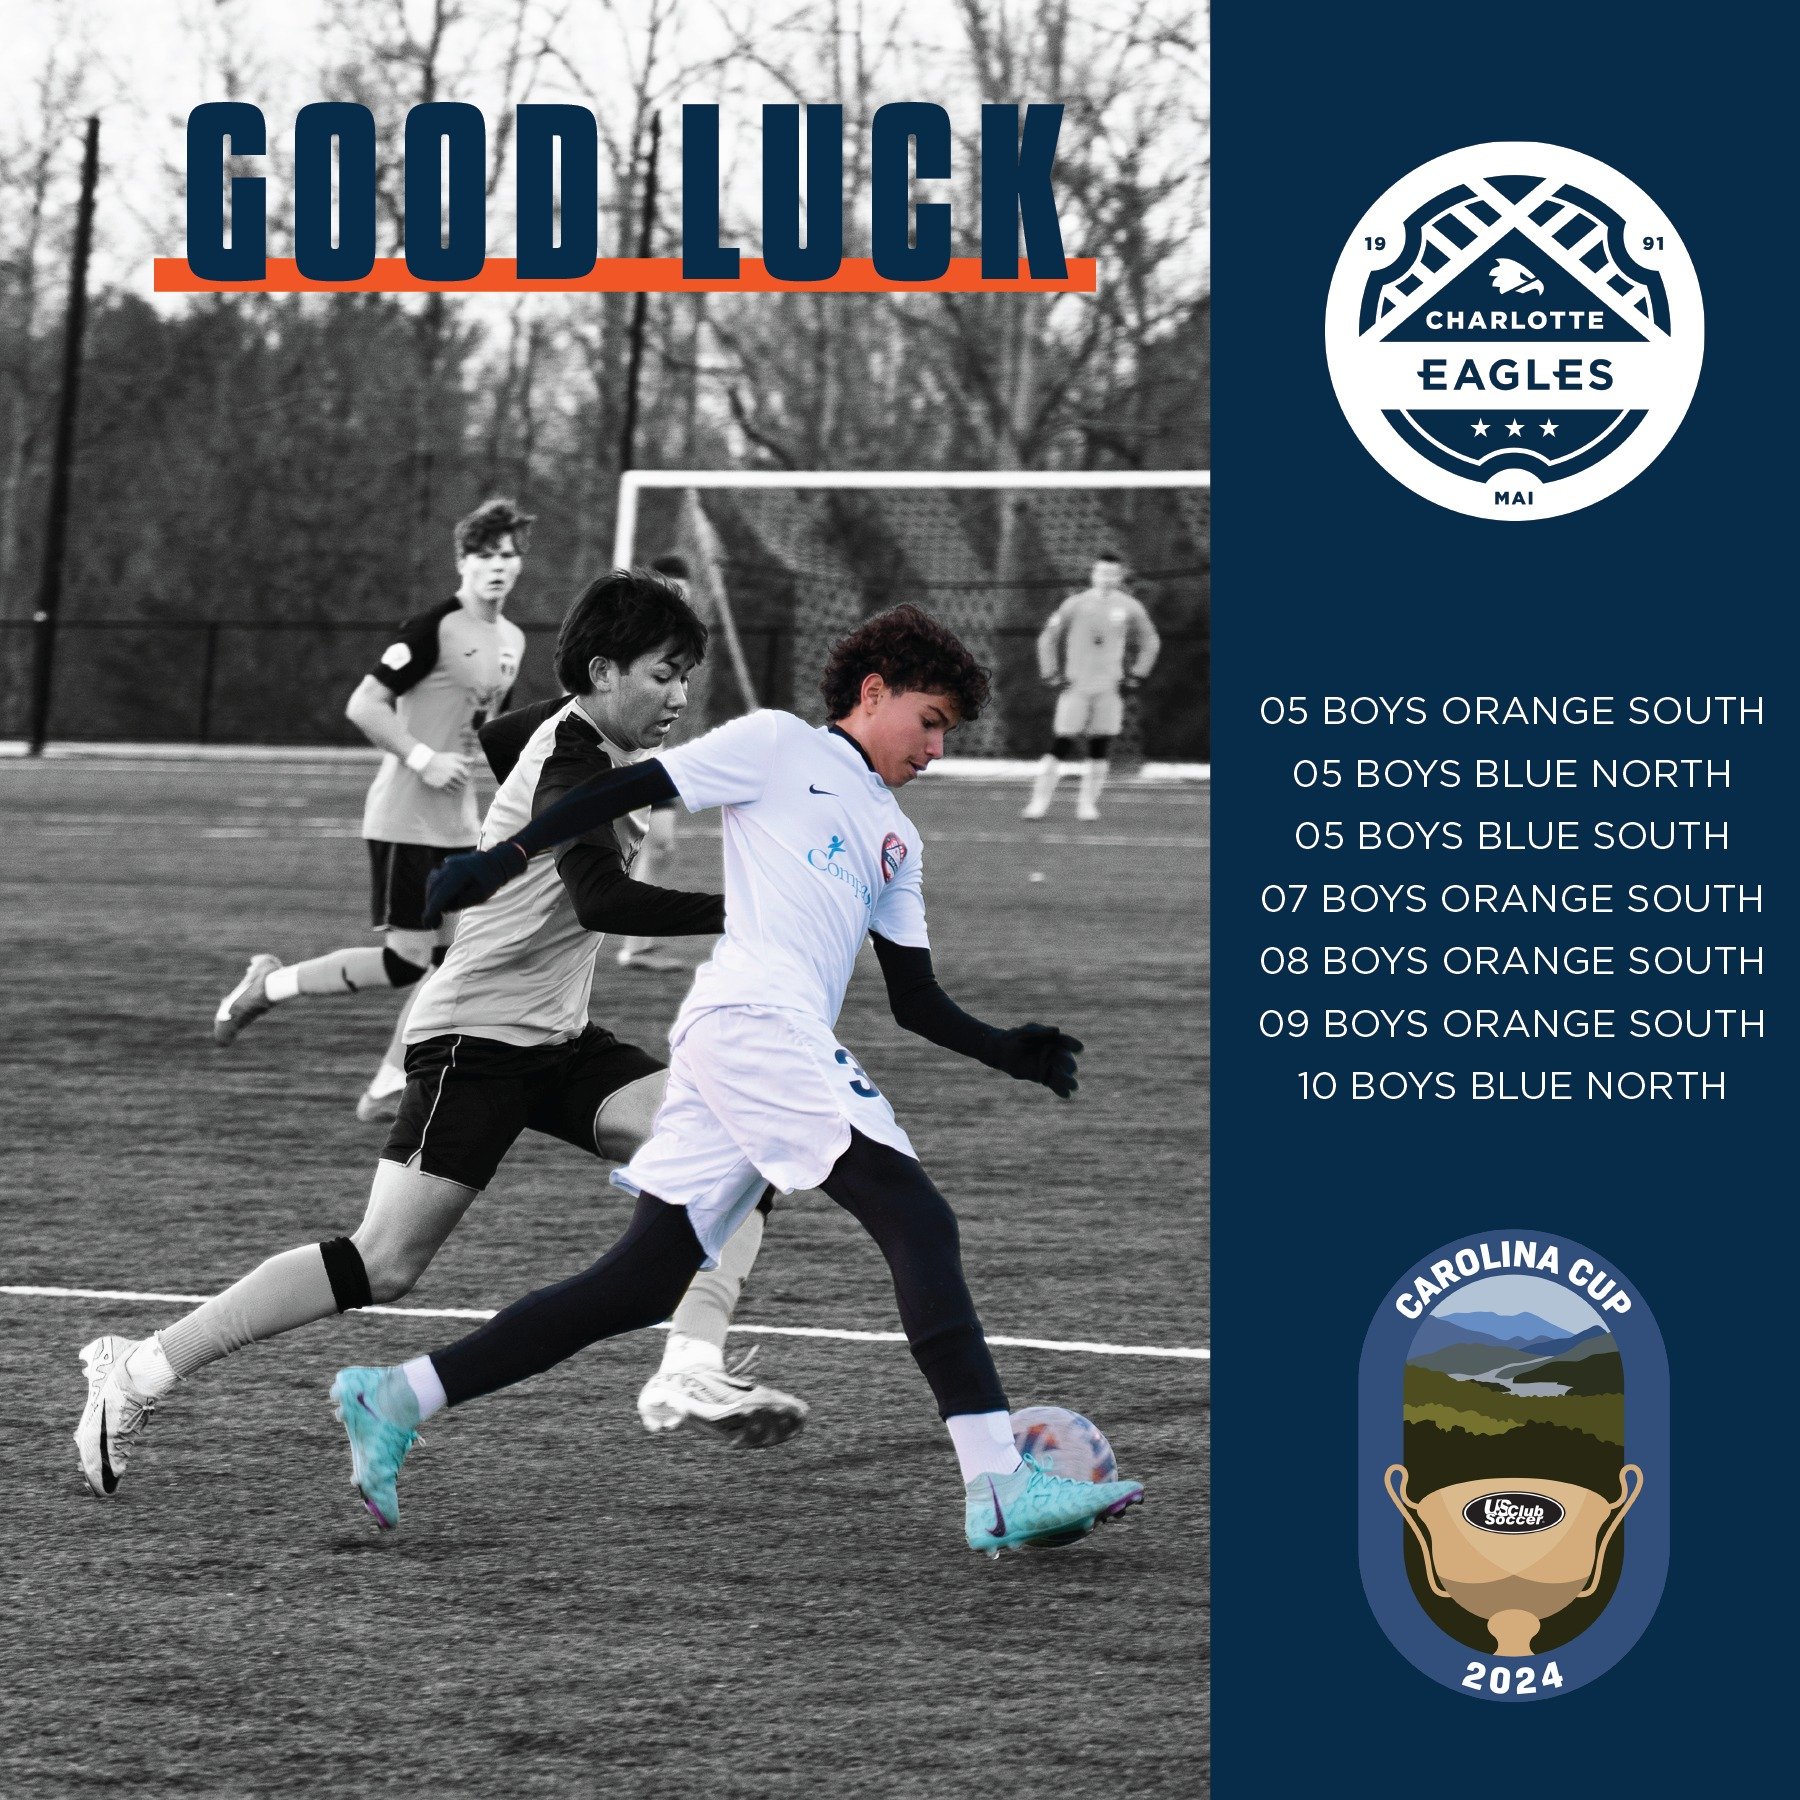 Best of Luck to our Select Teams that are headed to North Myrtle Beach South Carolina for the Carolina State Cup hosted by the Carolinas Champions League! Go Eagles! 🧡 🦅

#SoliDeoGloria #CharlotteEagles #CarolinaChampionsLeague #YouthSoccer #USClub